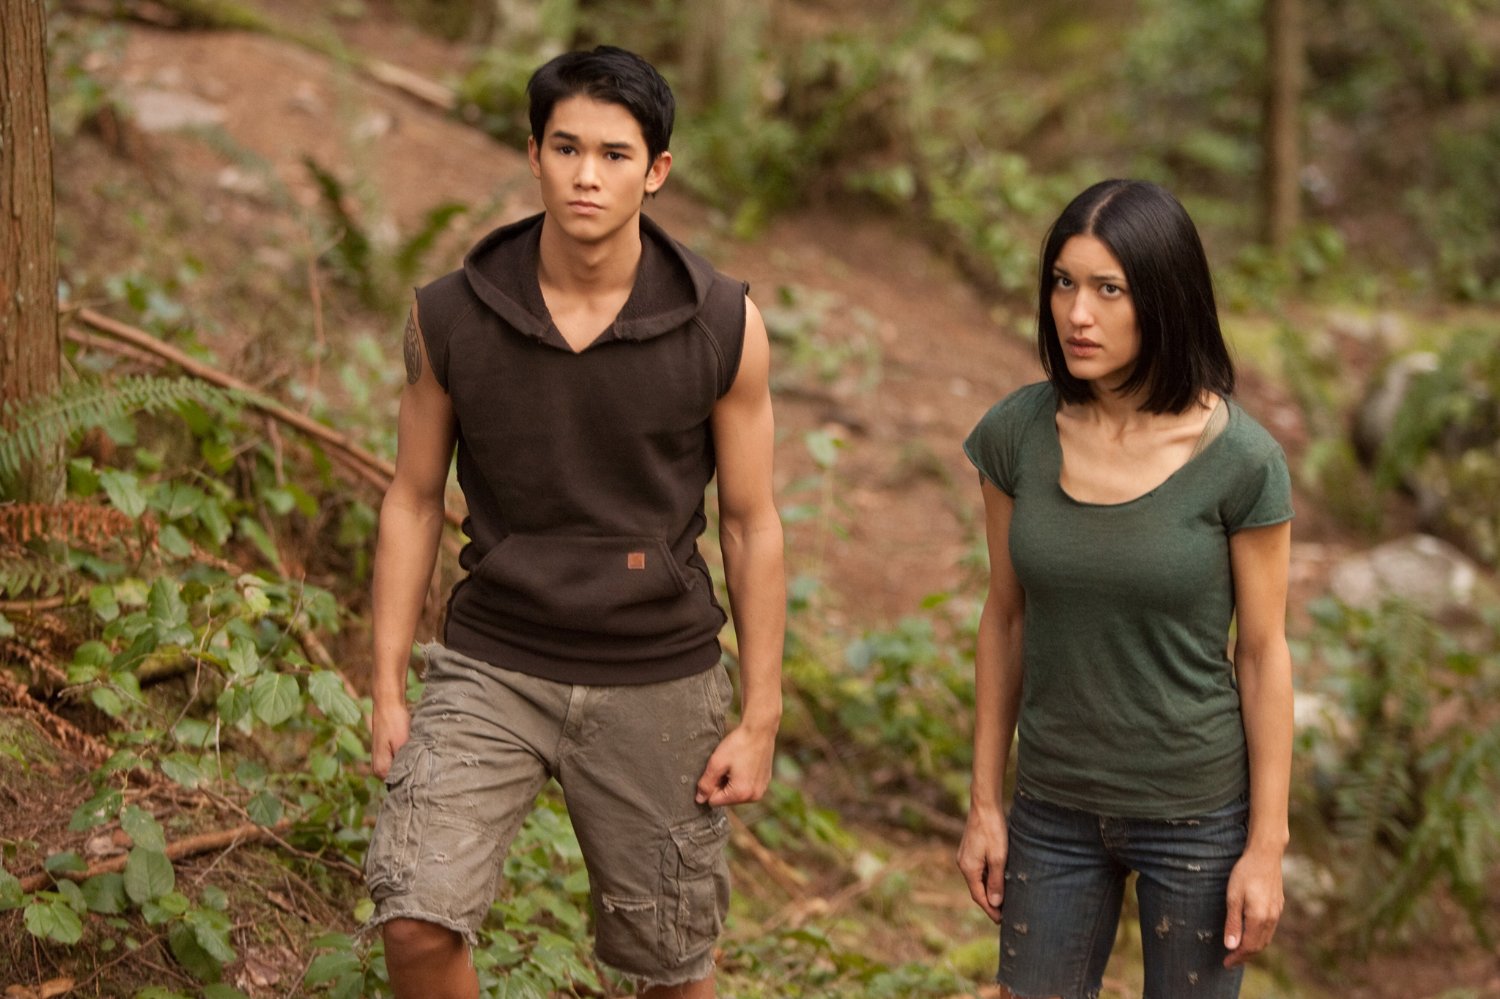 Leah Clearwater (Twilight character)